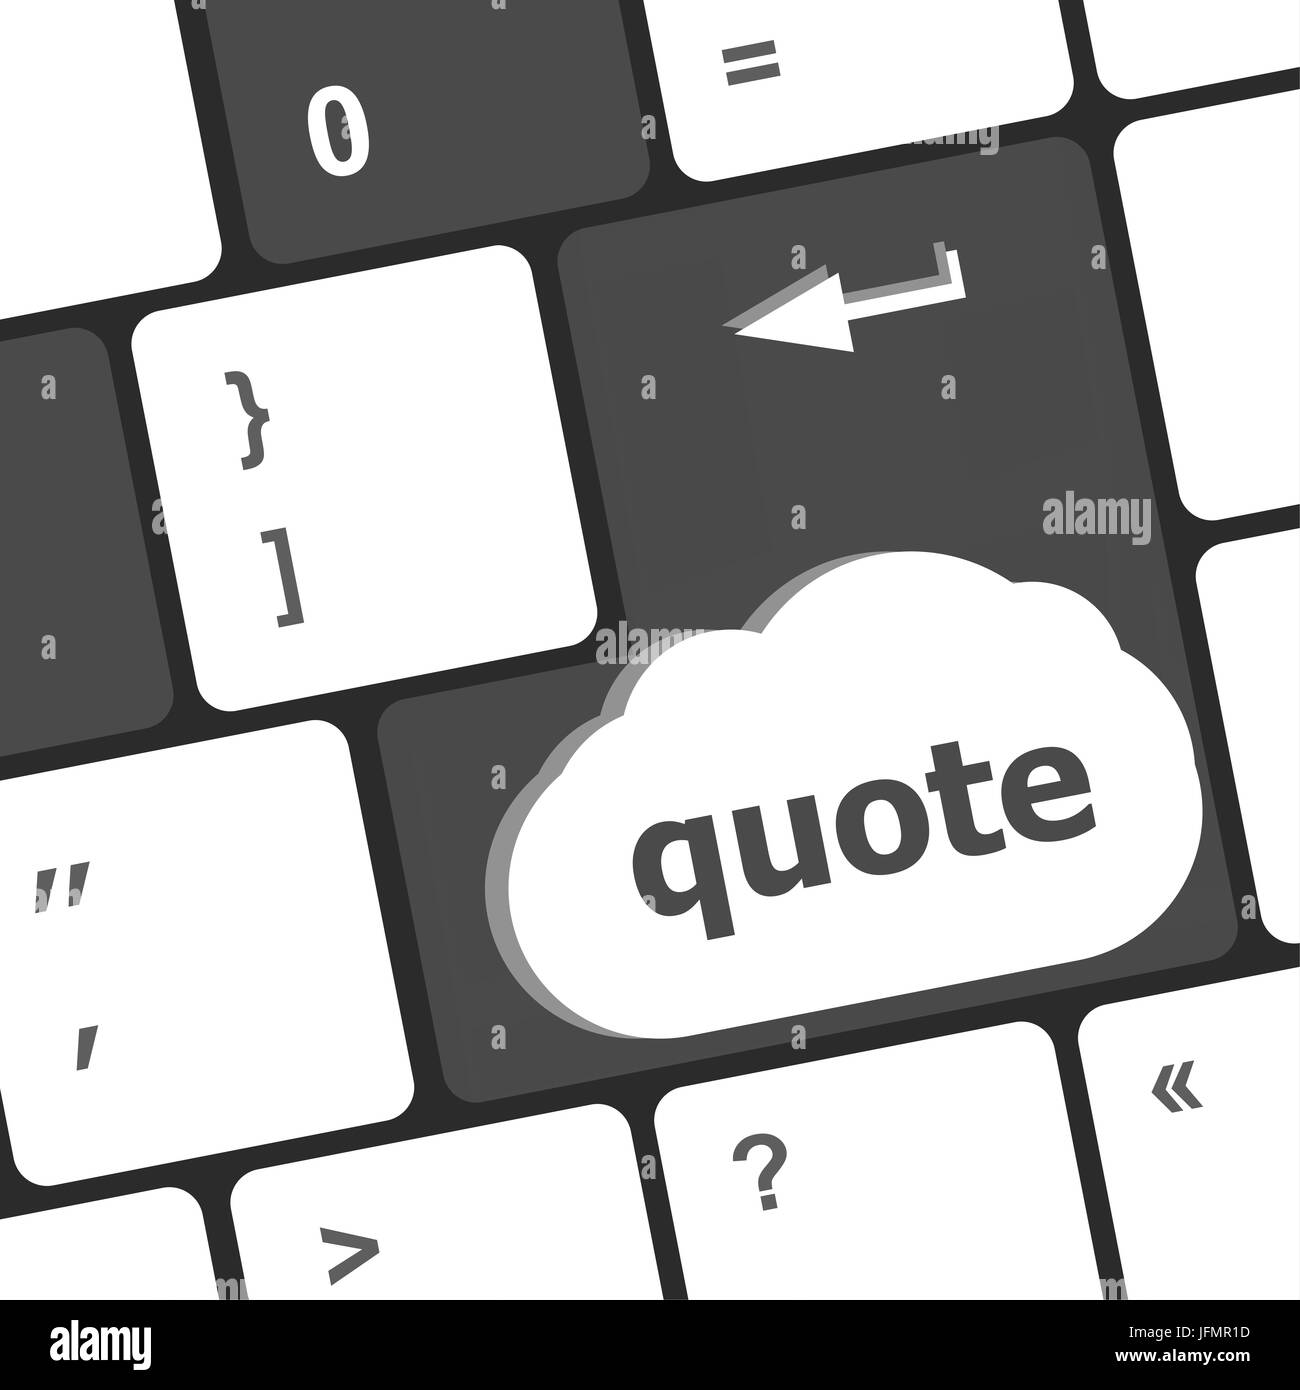 quote word on computer keyboard keys button Stock Photo